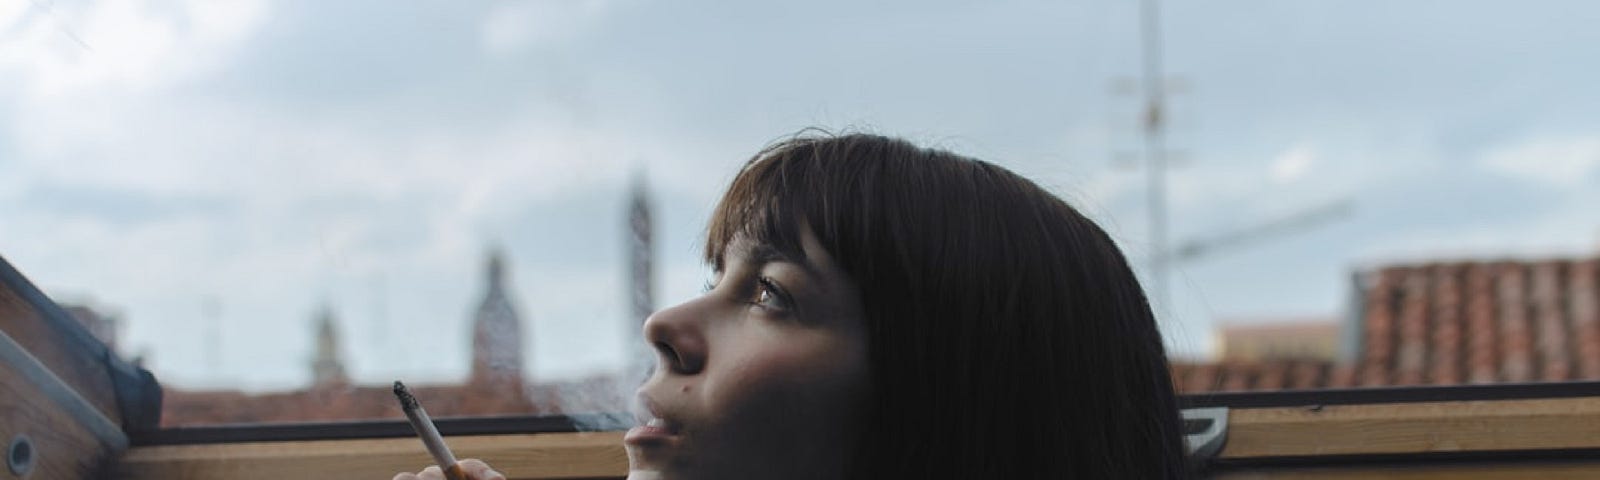 Young woman with dark hair smoking while looking thoughtfully up t the sky.